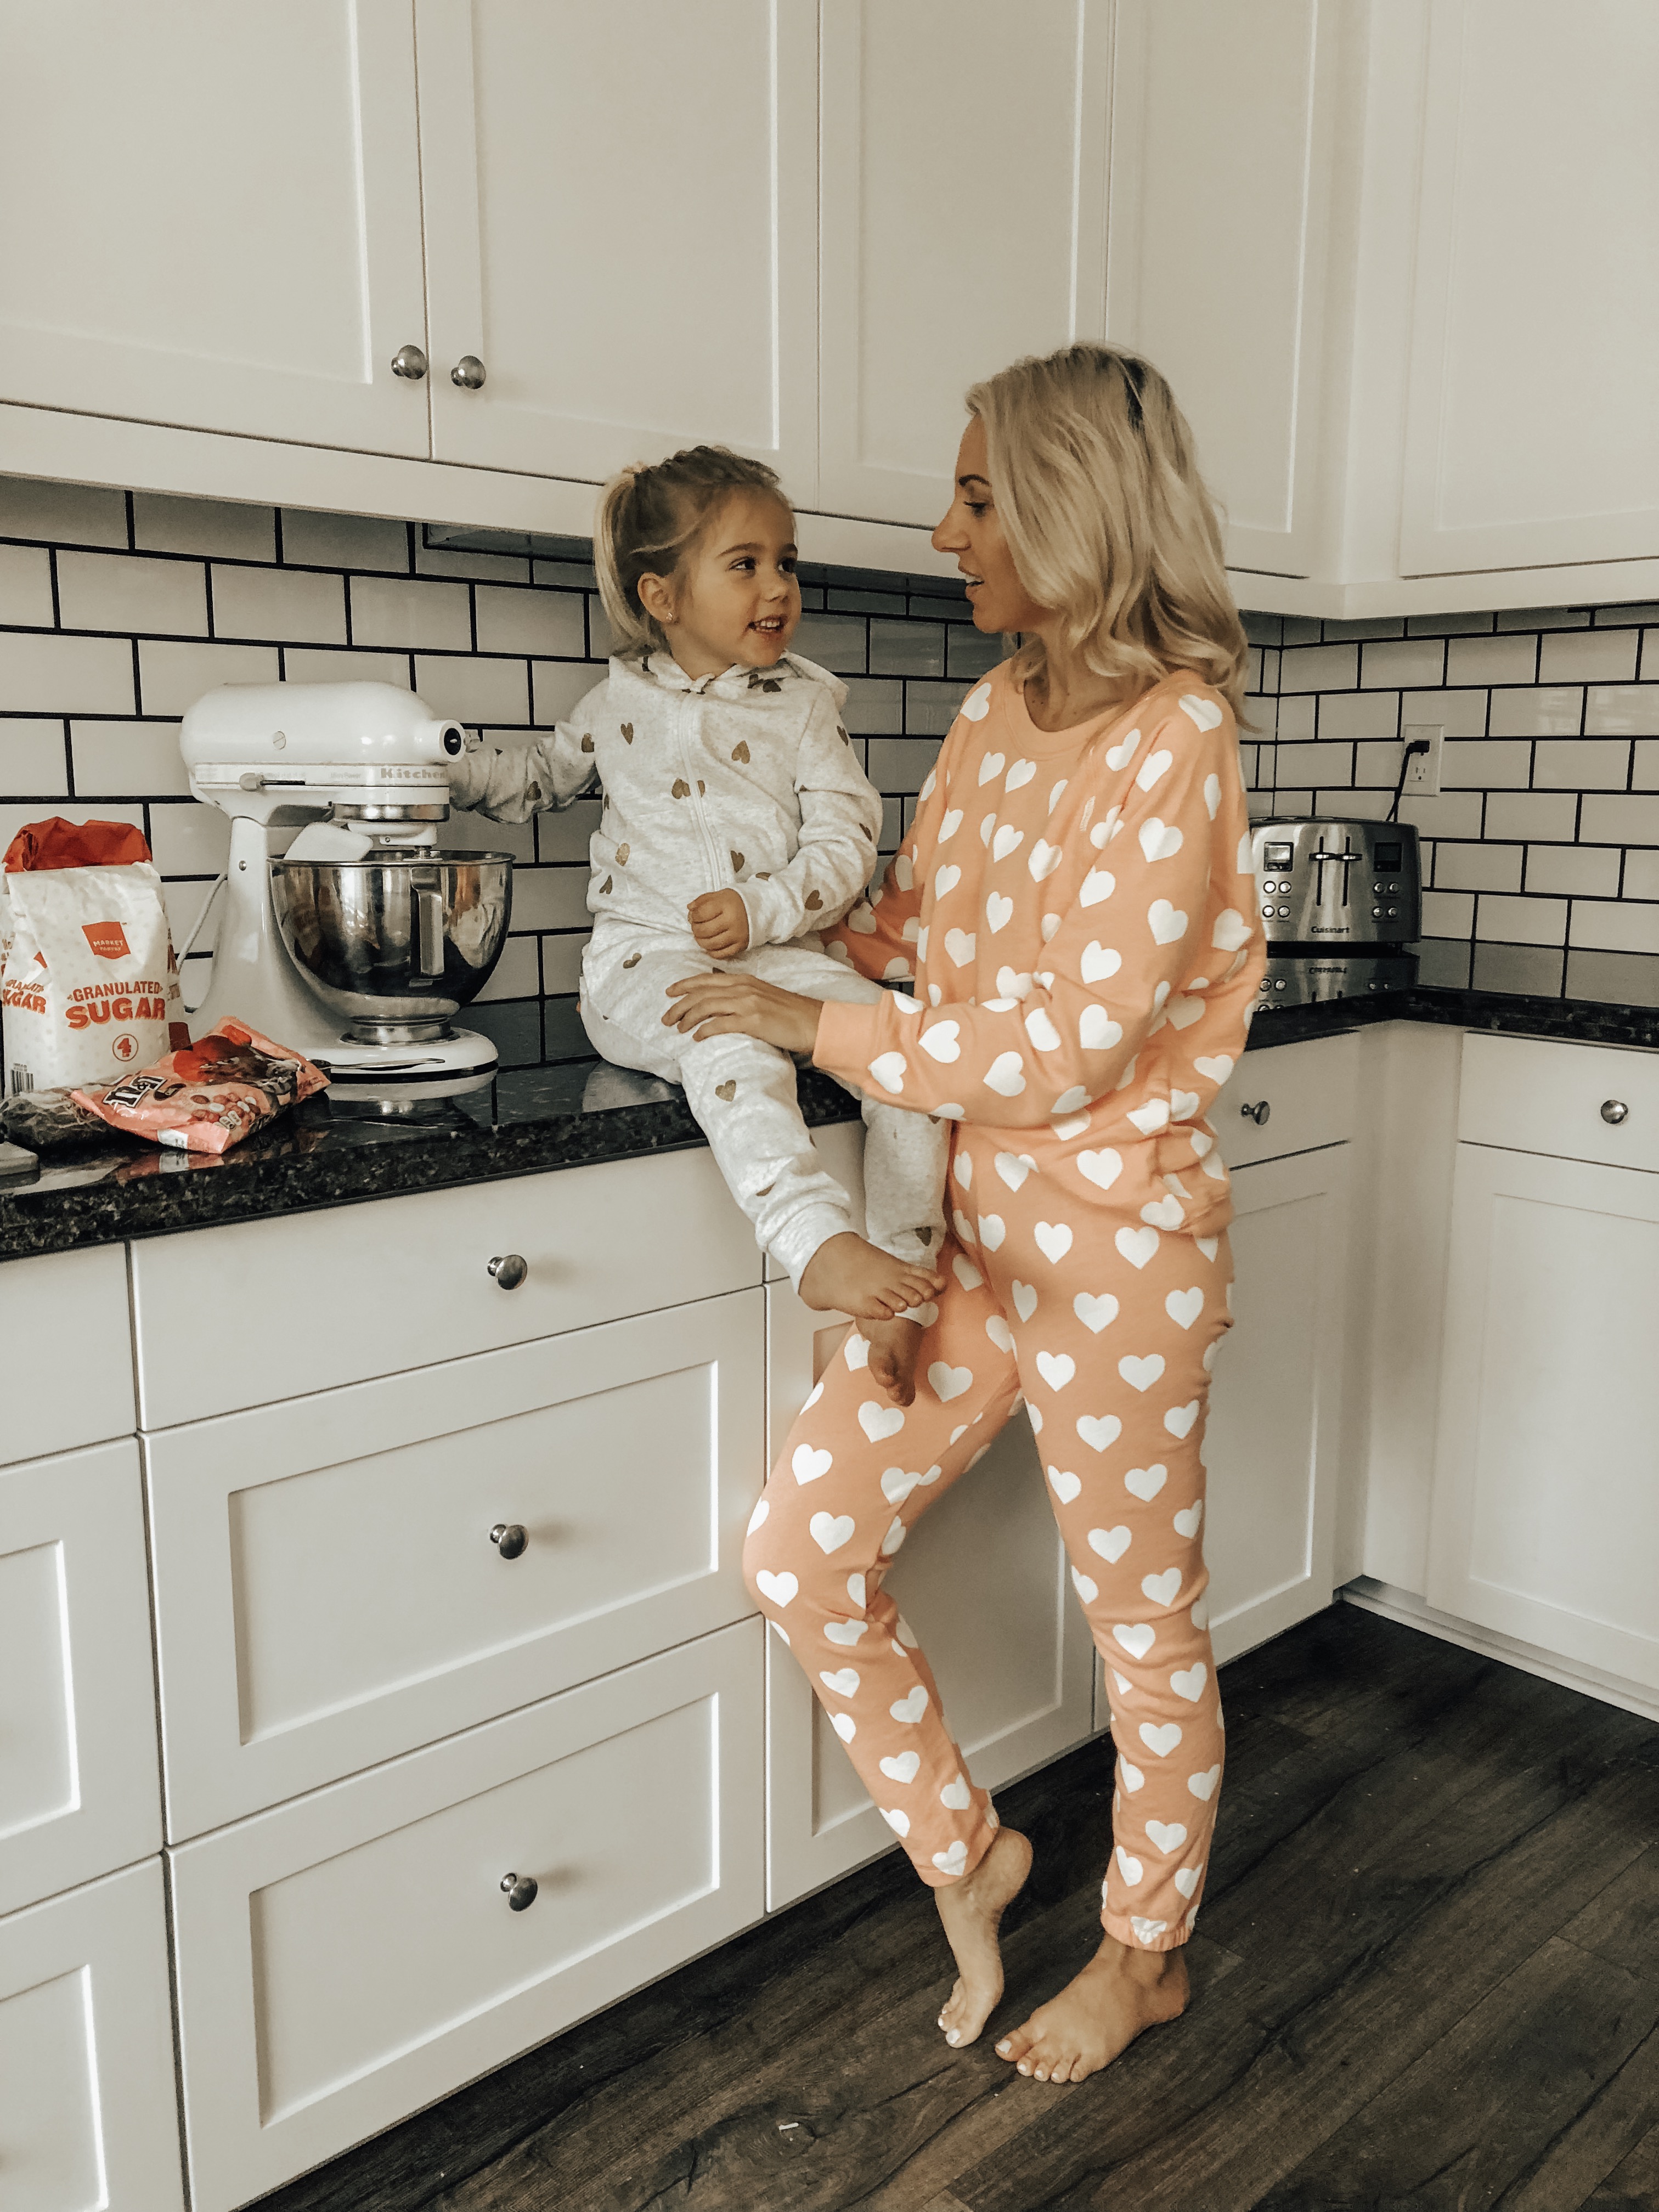 COZY & CASUAL VALENTINES AT HOME- Jaclyn De Leon Style + mommy and me making cookies + valentines inspired outfits + heart matching sets + pink + mini me + mom style + matching pajamas + at home making cookies + in the kitchen + matching outfits + mom life + kid style + nordstrom rack + h&m style